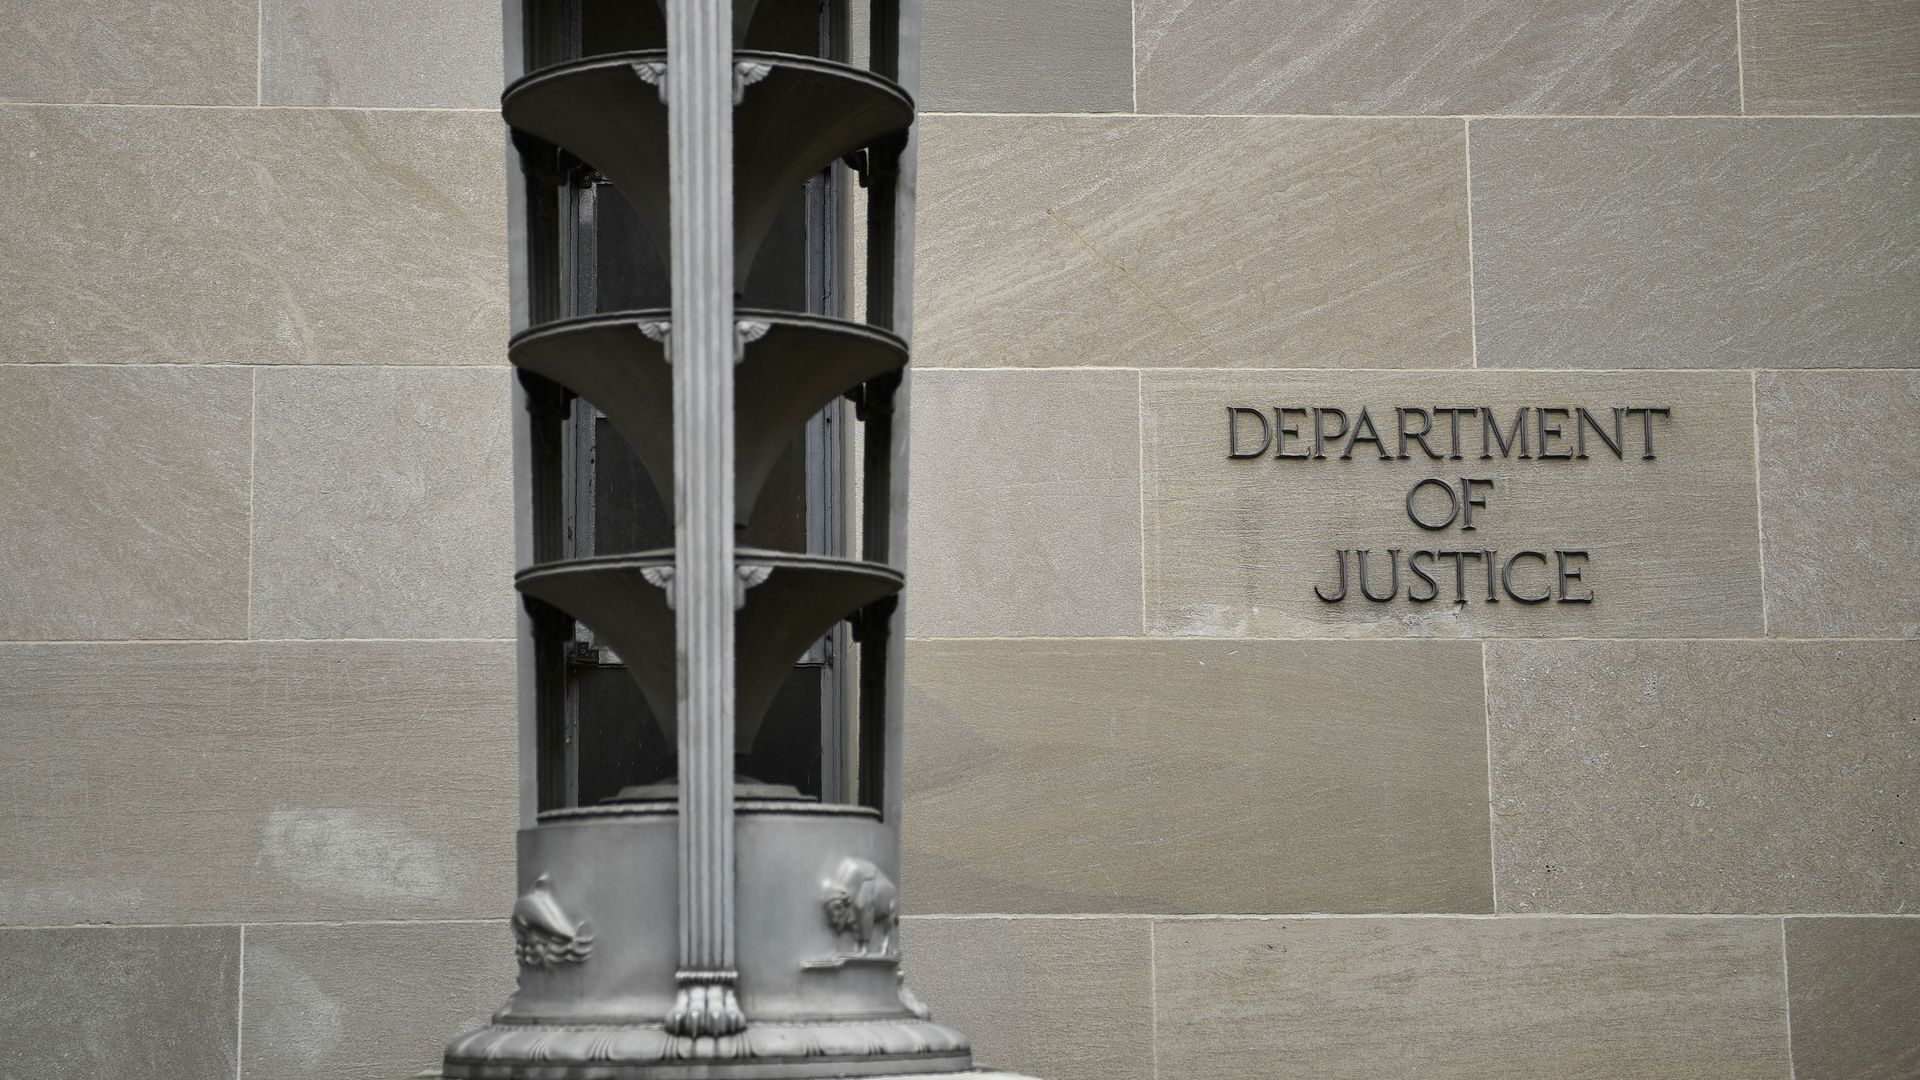 Photo of the outside of the DOJ building with a sign that says "Department of Justice"